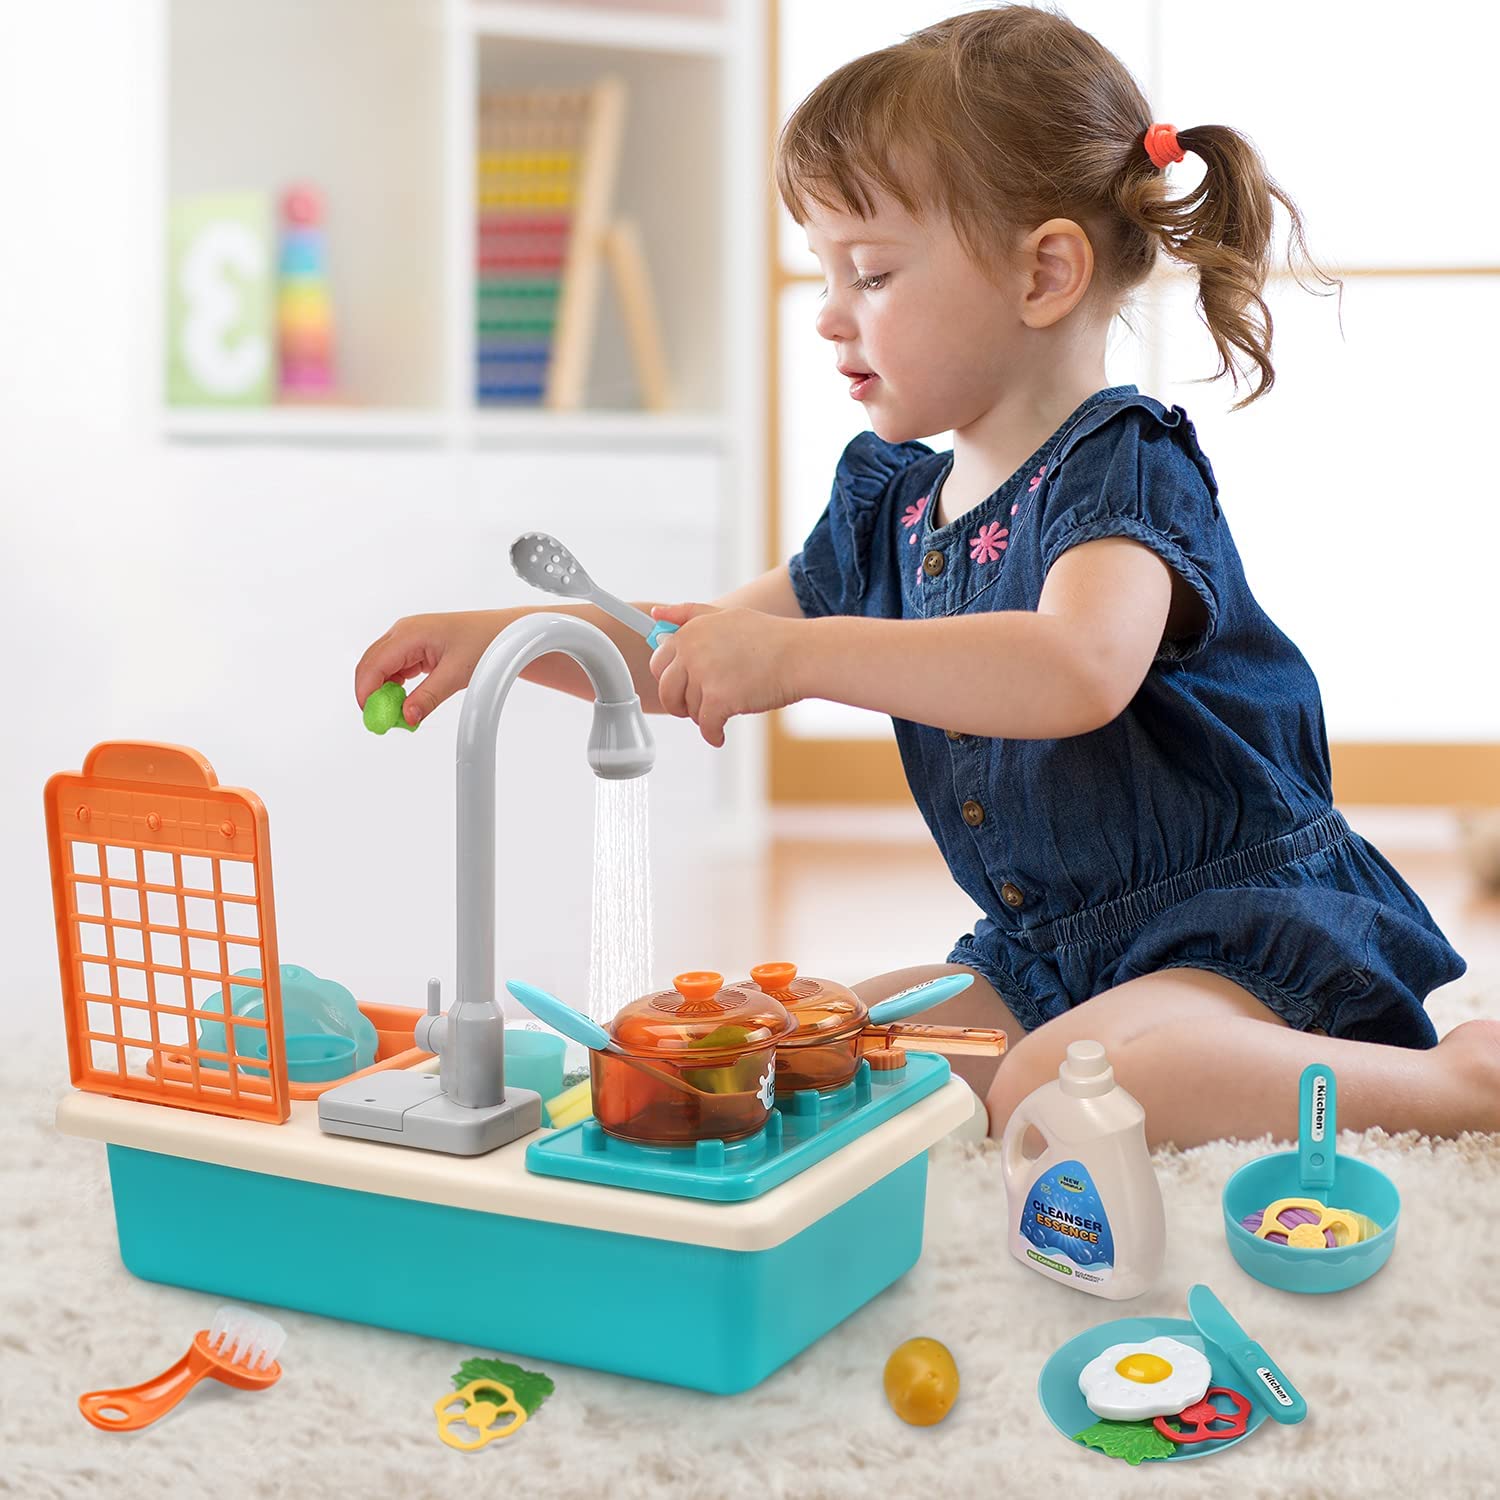 CUTE STONE Pretend Play Kitchen Sink Toys Cooking Stove Cookware Pot and Pan